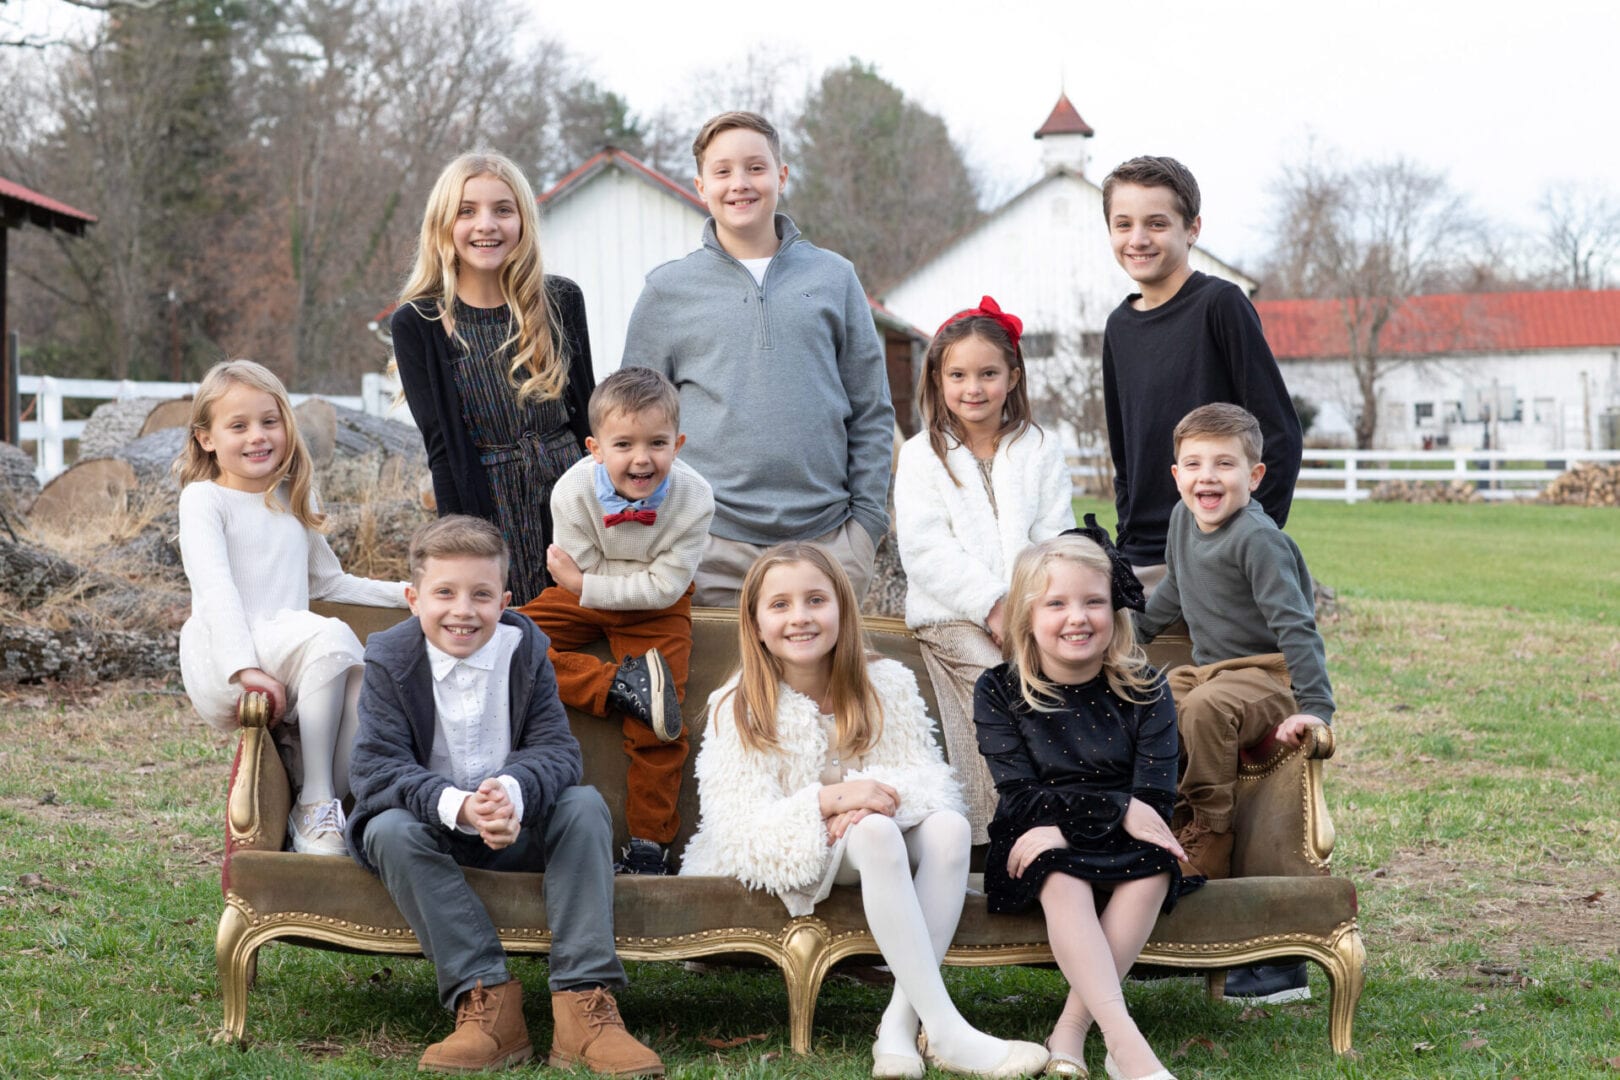 Large family cousin photo in Leesburg